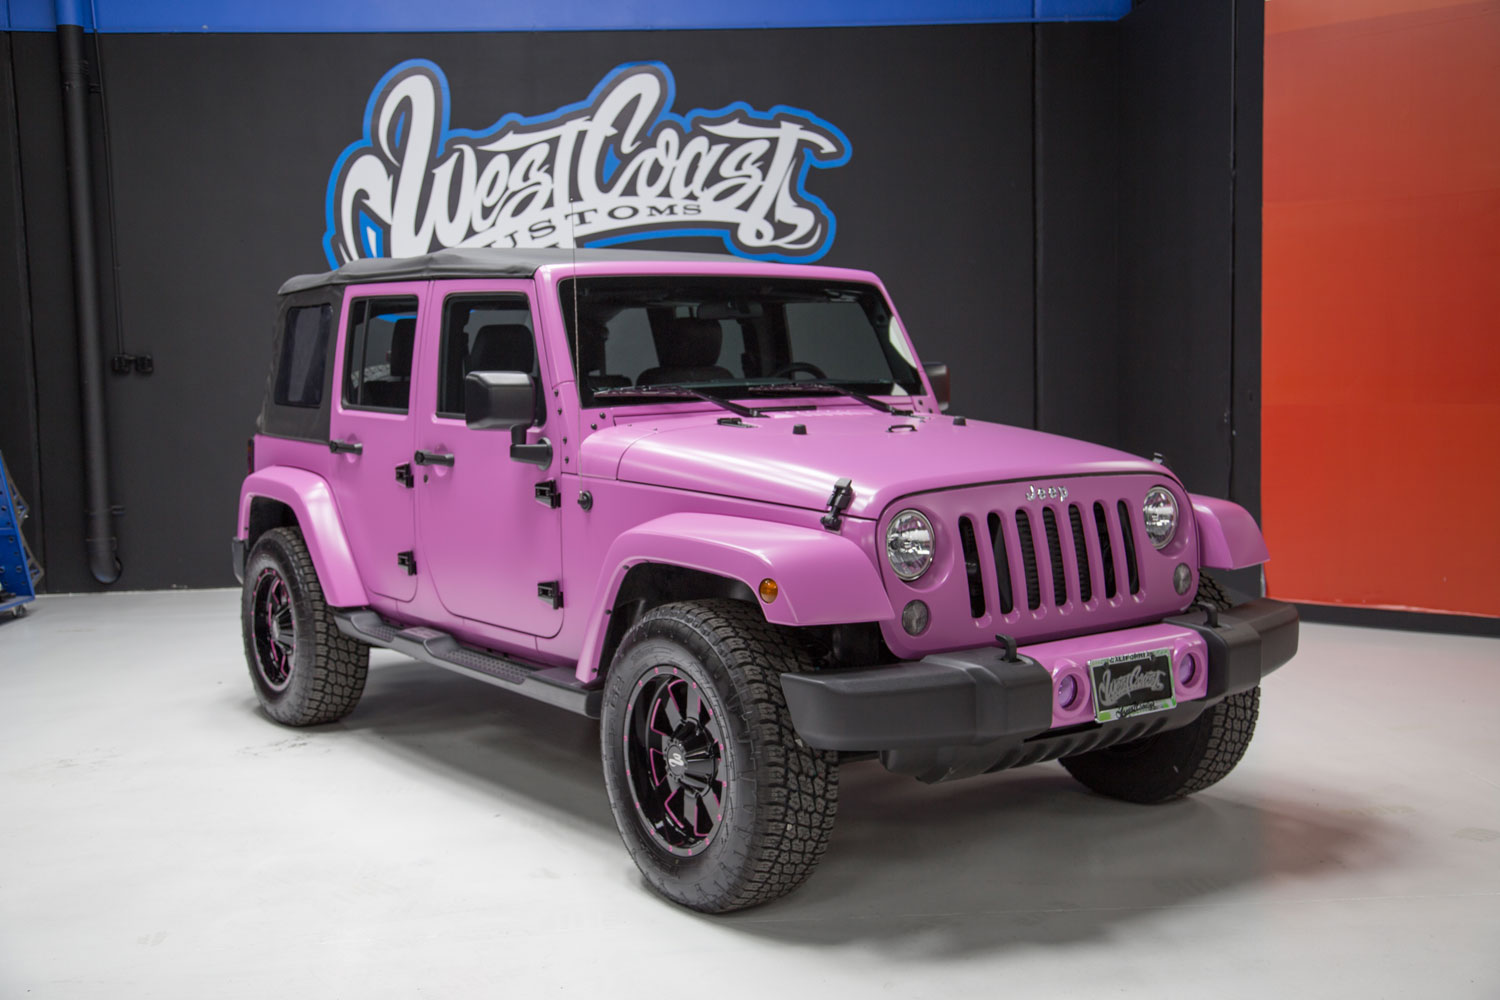 Photo 1 of 2015 HSV Supercharged Wrangler Jeep JK in Frozen Matte Pink.